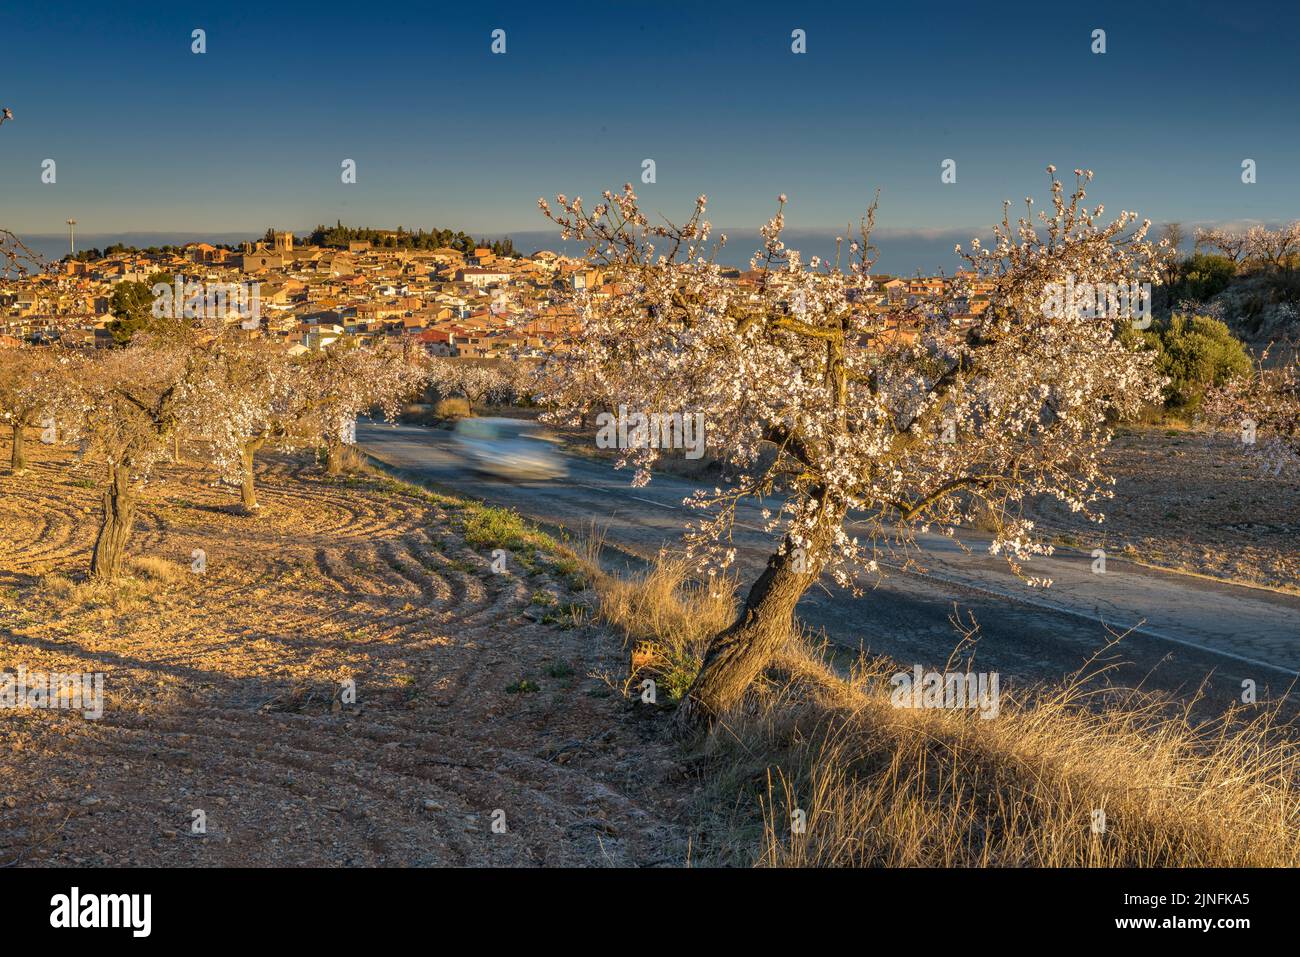 Sunrise over fields of almond trees blooming around the town of Arbeca (Les Garrigues, Lleida, Catalonia, Spain)  ESP: Amanecer en almendros de Arbeca Stock Photo